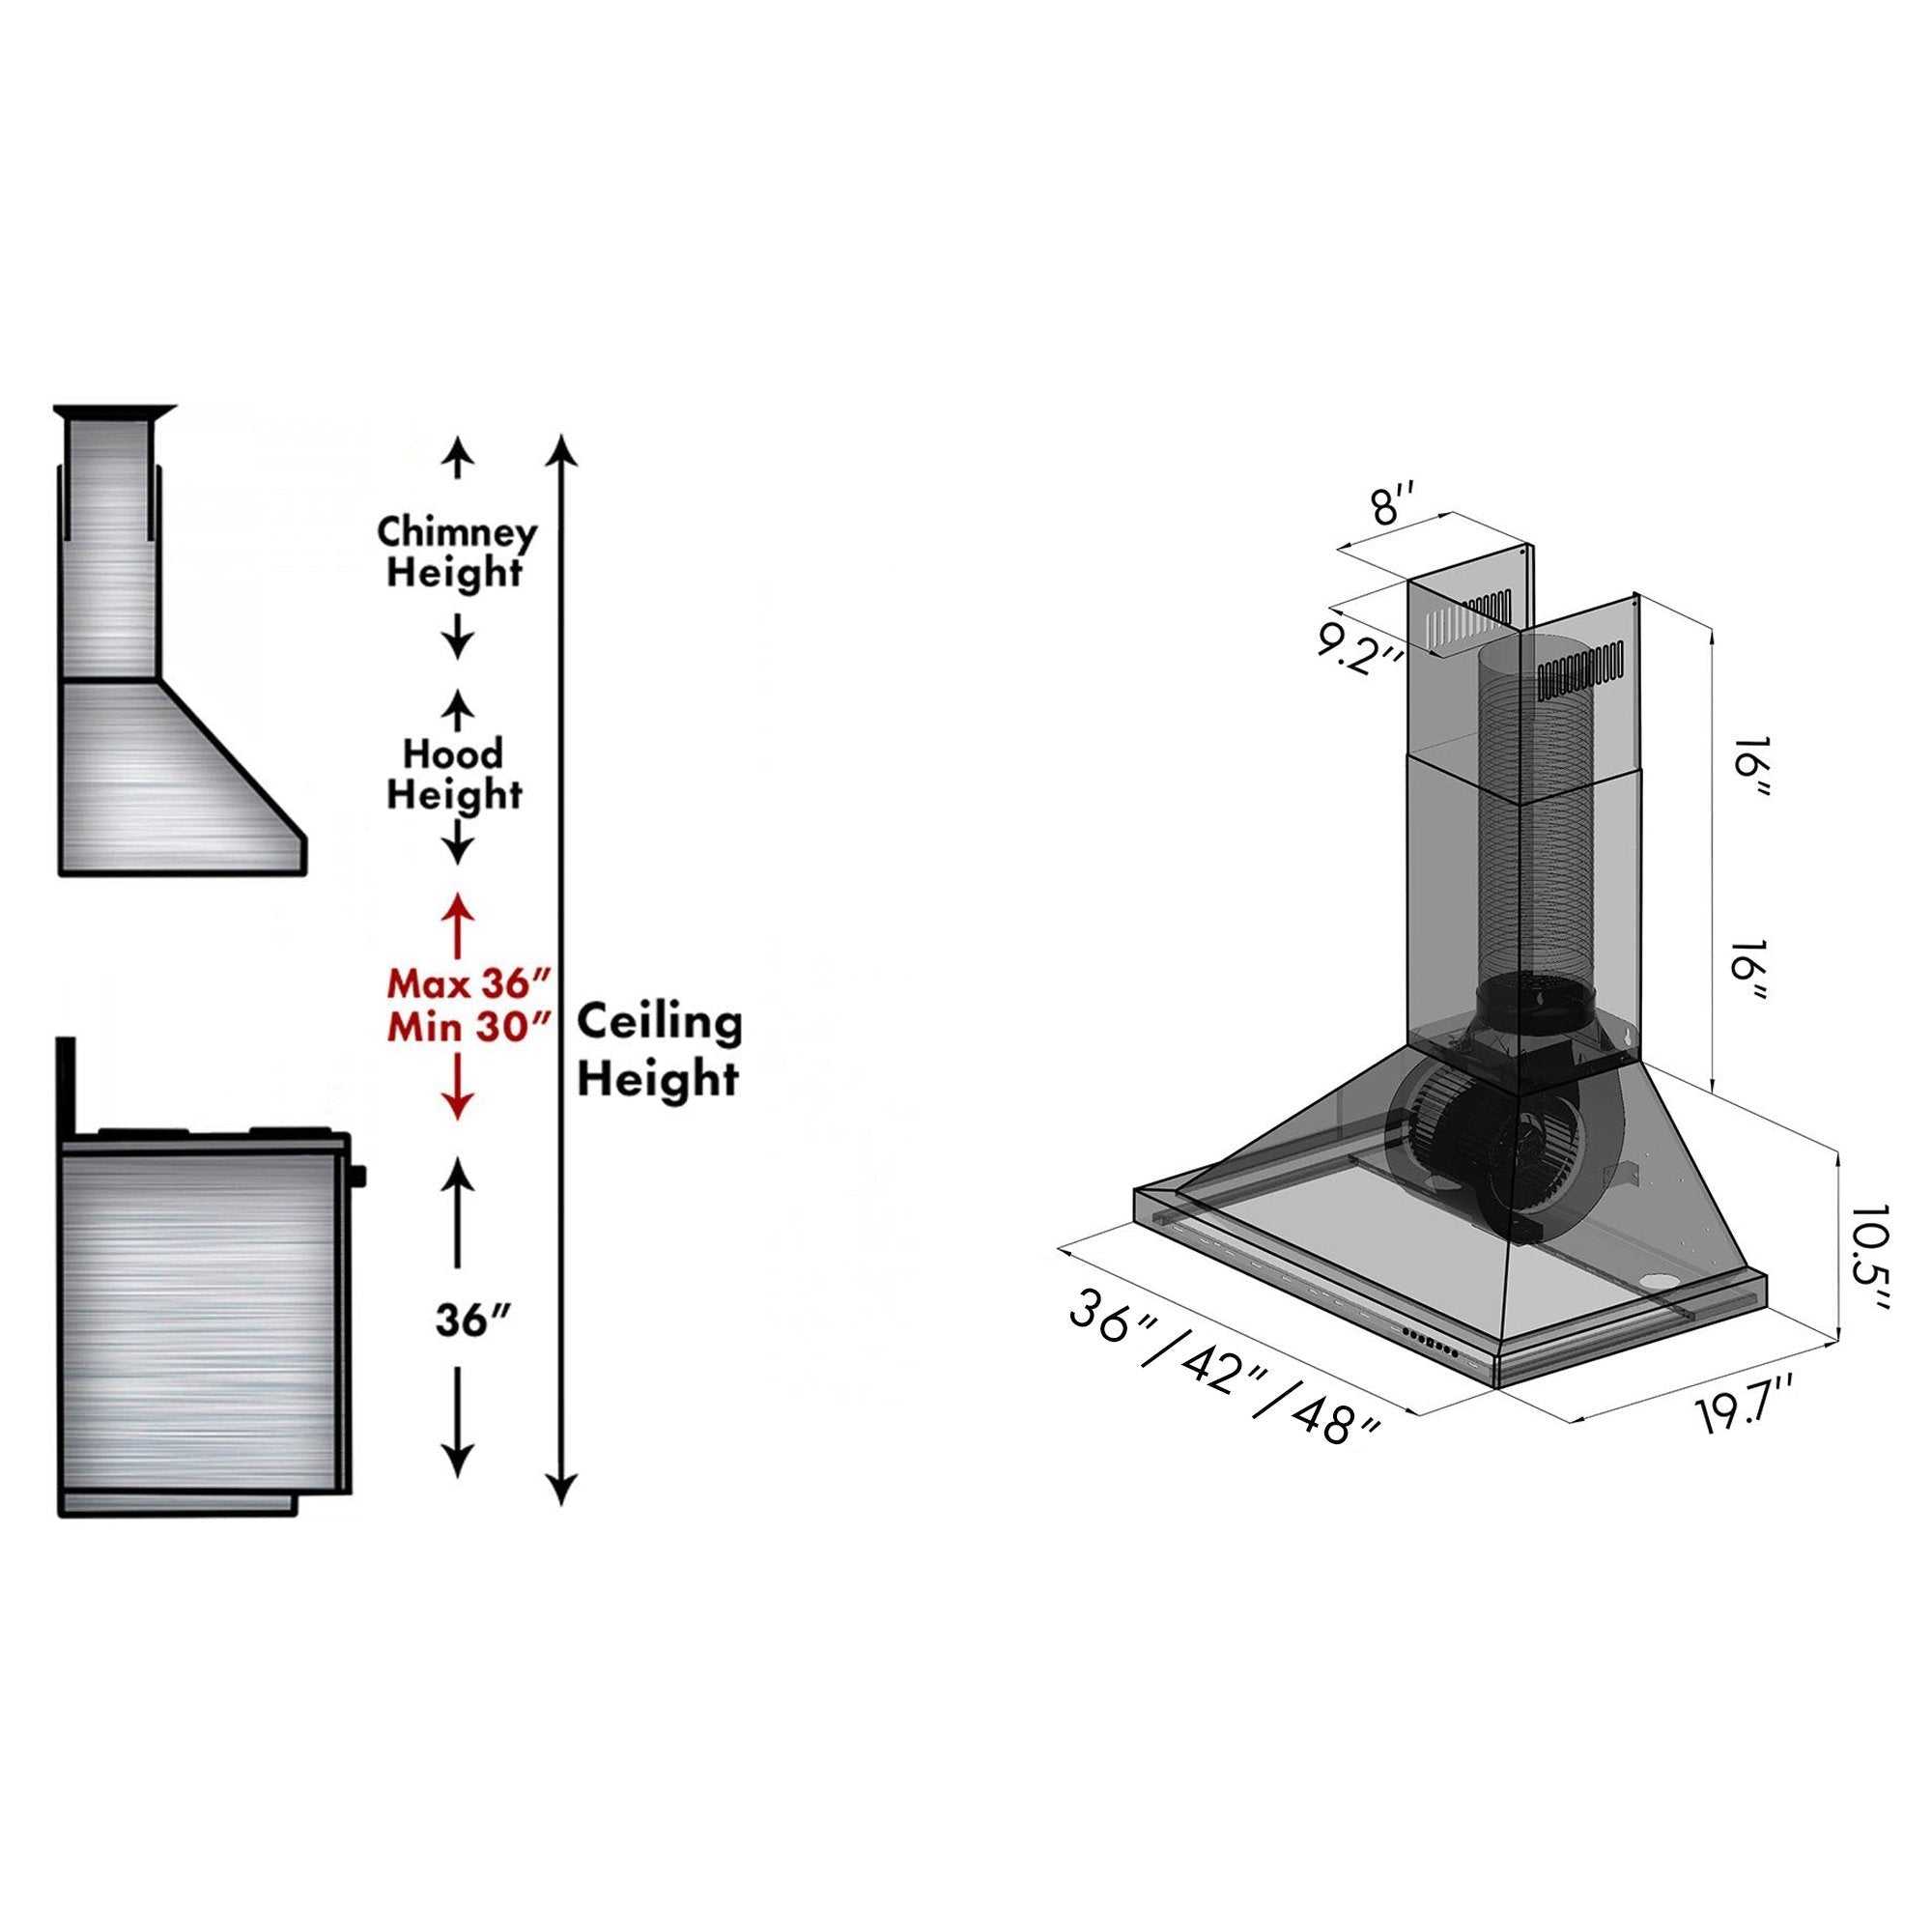 ZLINE 42 in. Recirculating Wall Mount Range Hood with Charcoal Filters in Stainless Steel (KB-CF-42) chimney height guide and dimensions